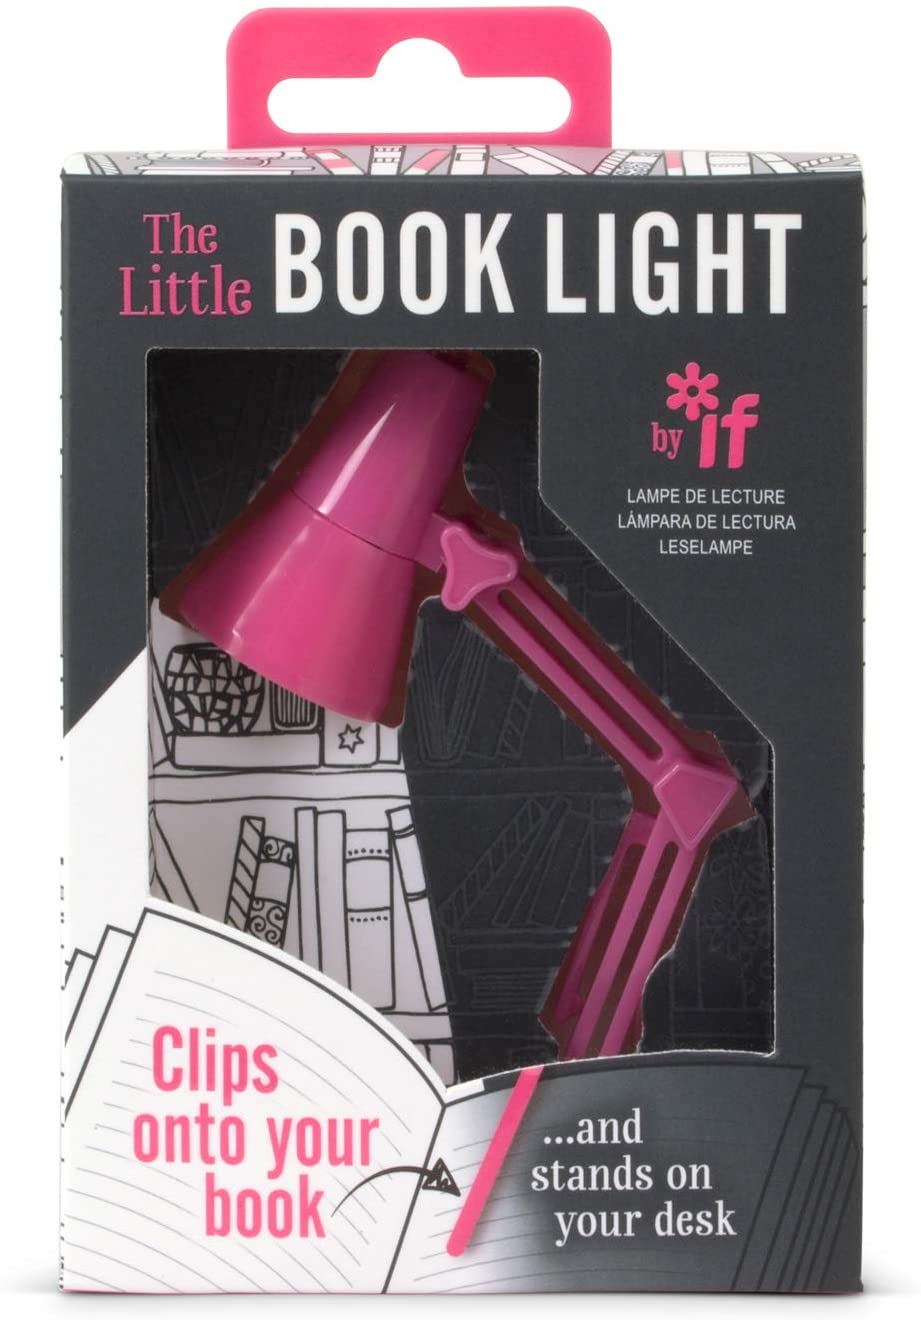 Lampa pentru citit - The little book light - Pink | If (That Company Called) image3